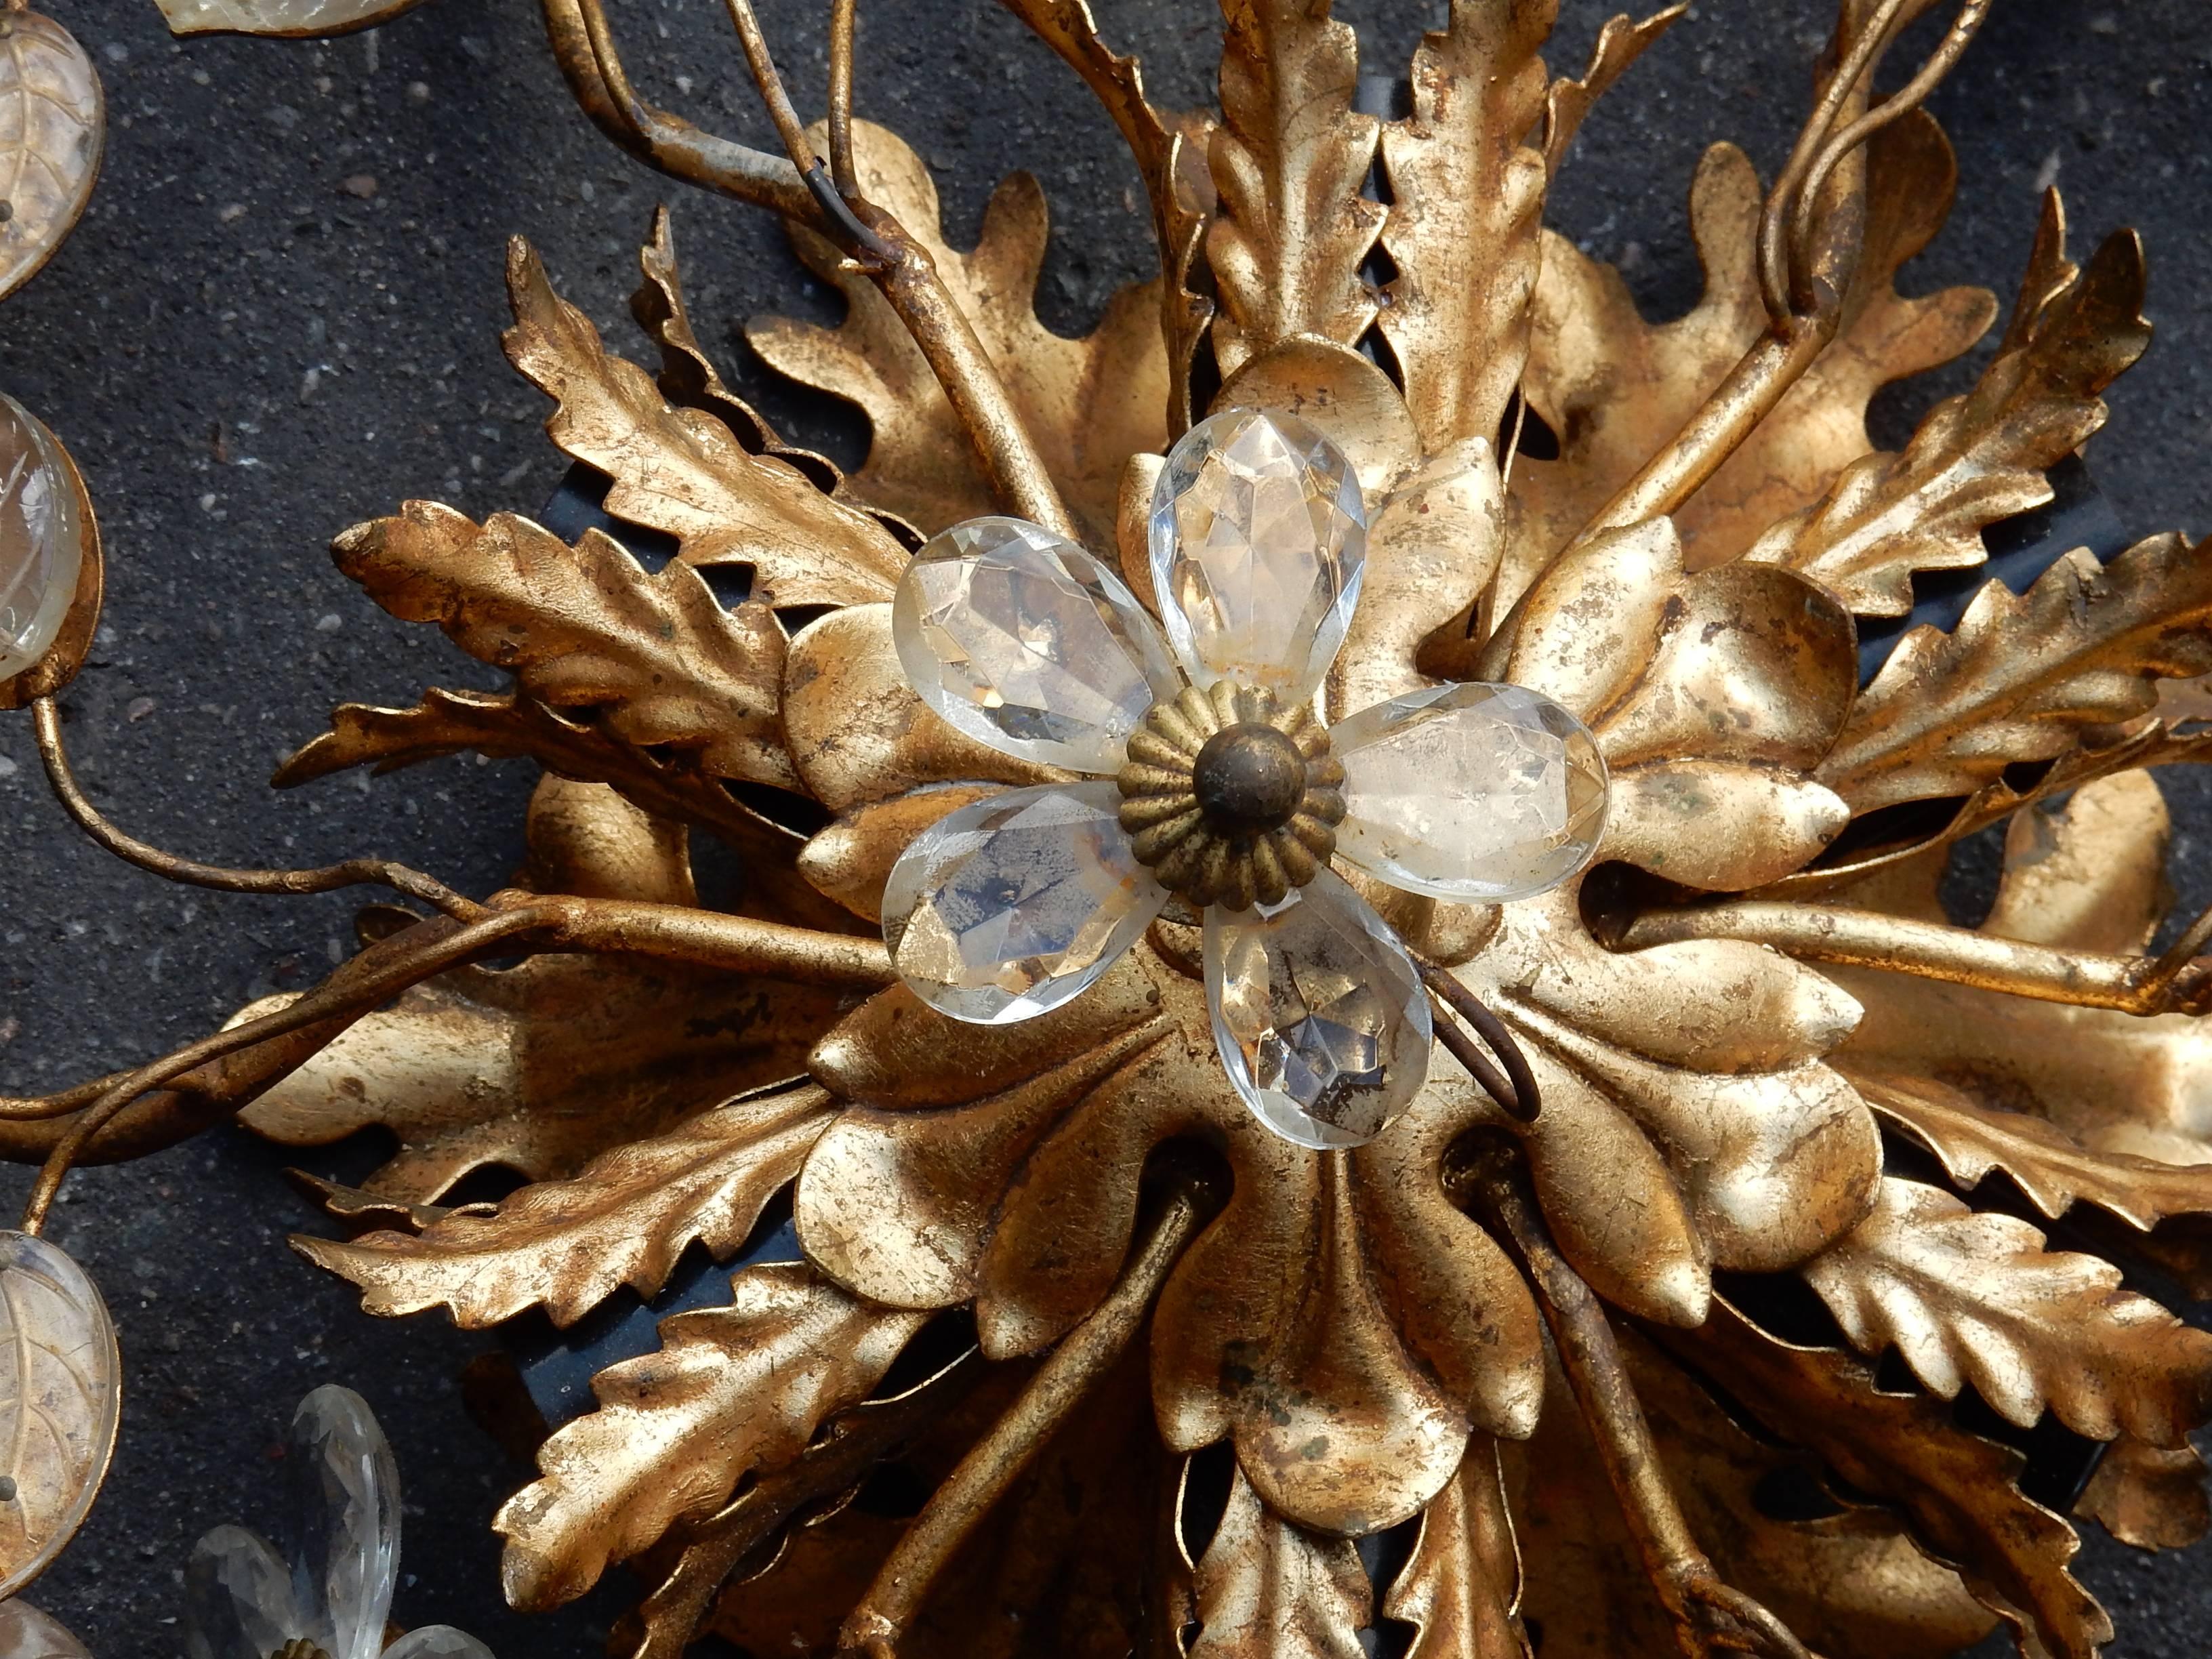 French 1950-1970 Ceiling Light Has Floral Decoration in the Style of Maison Baguès